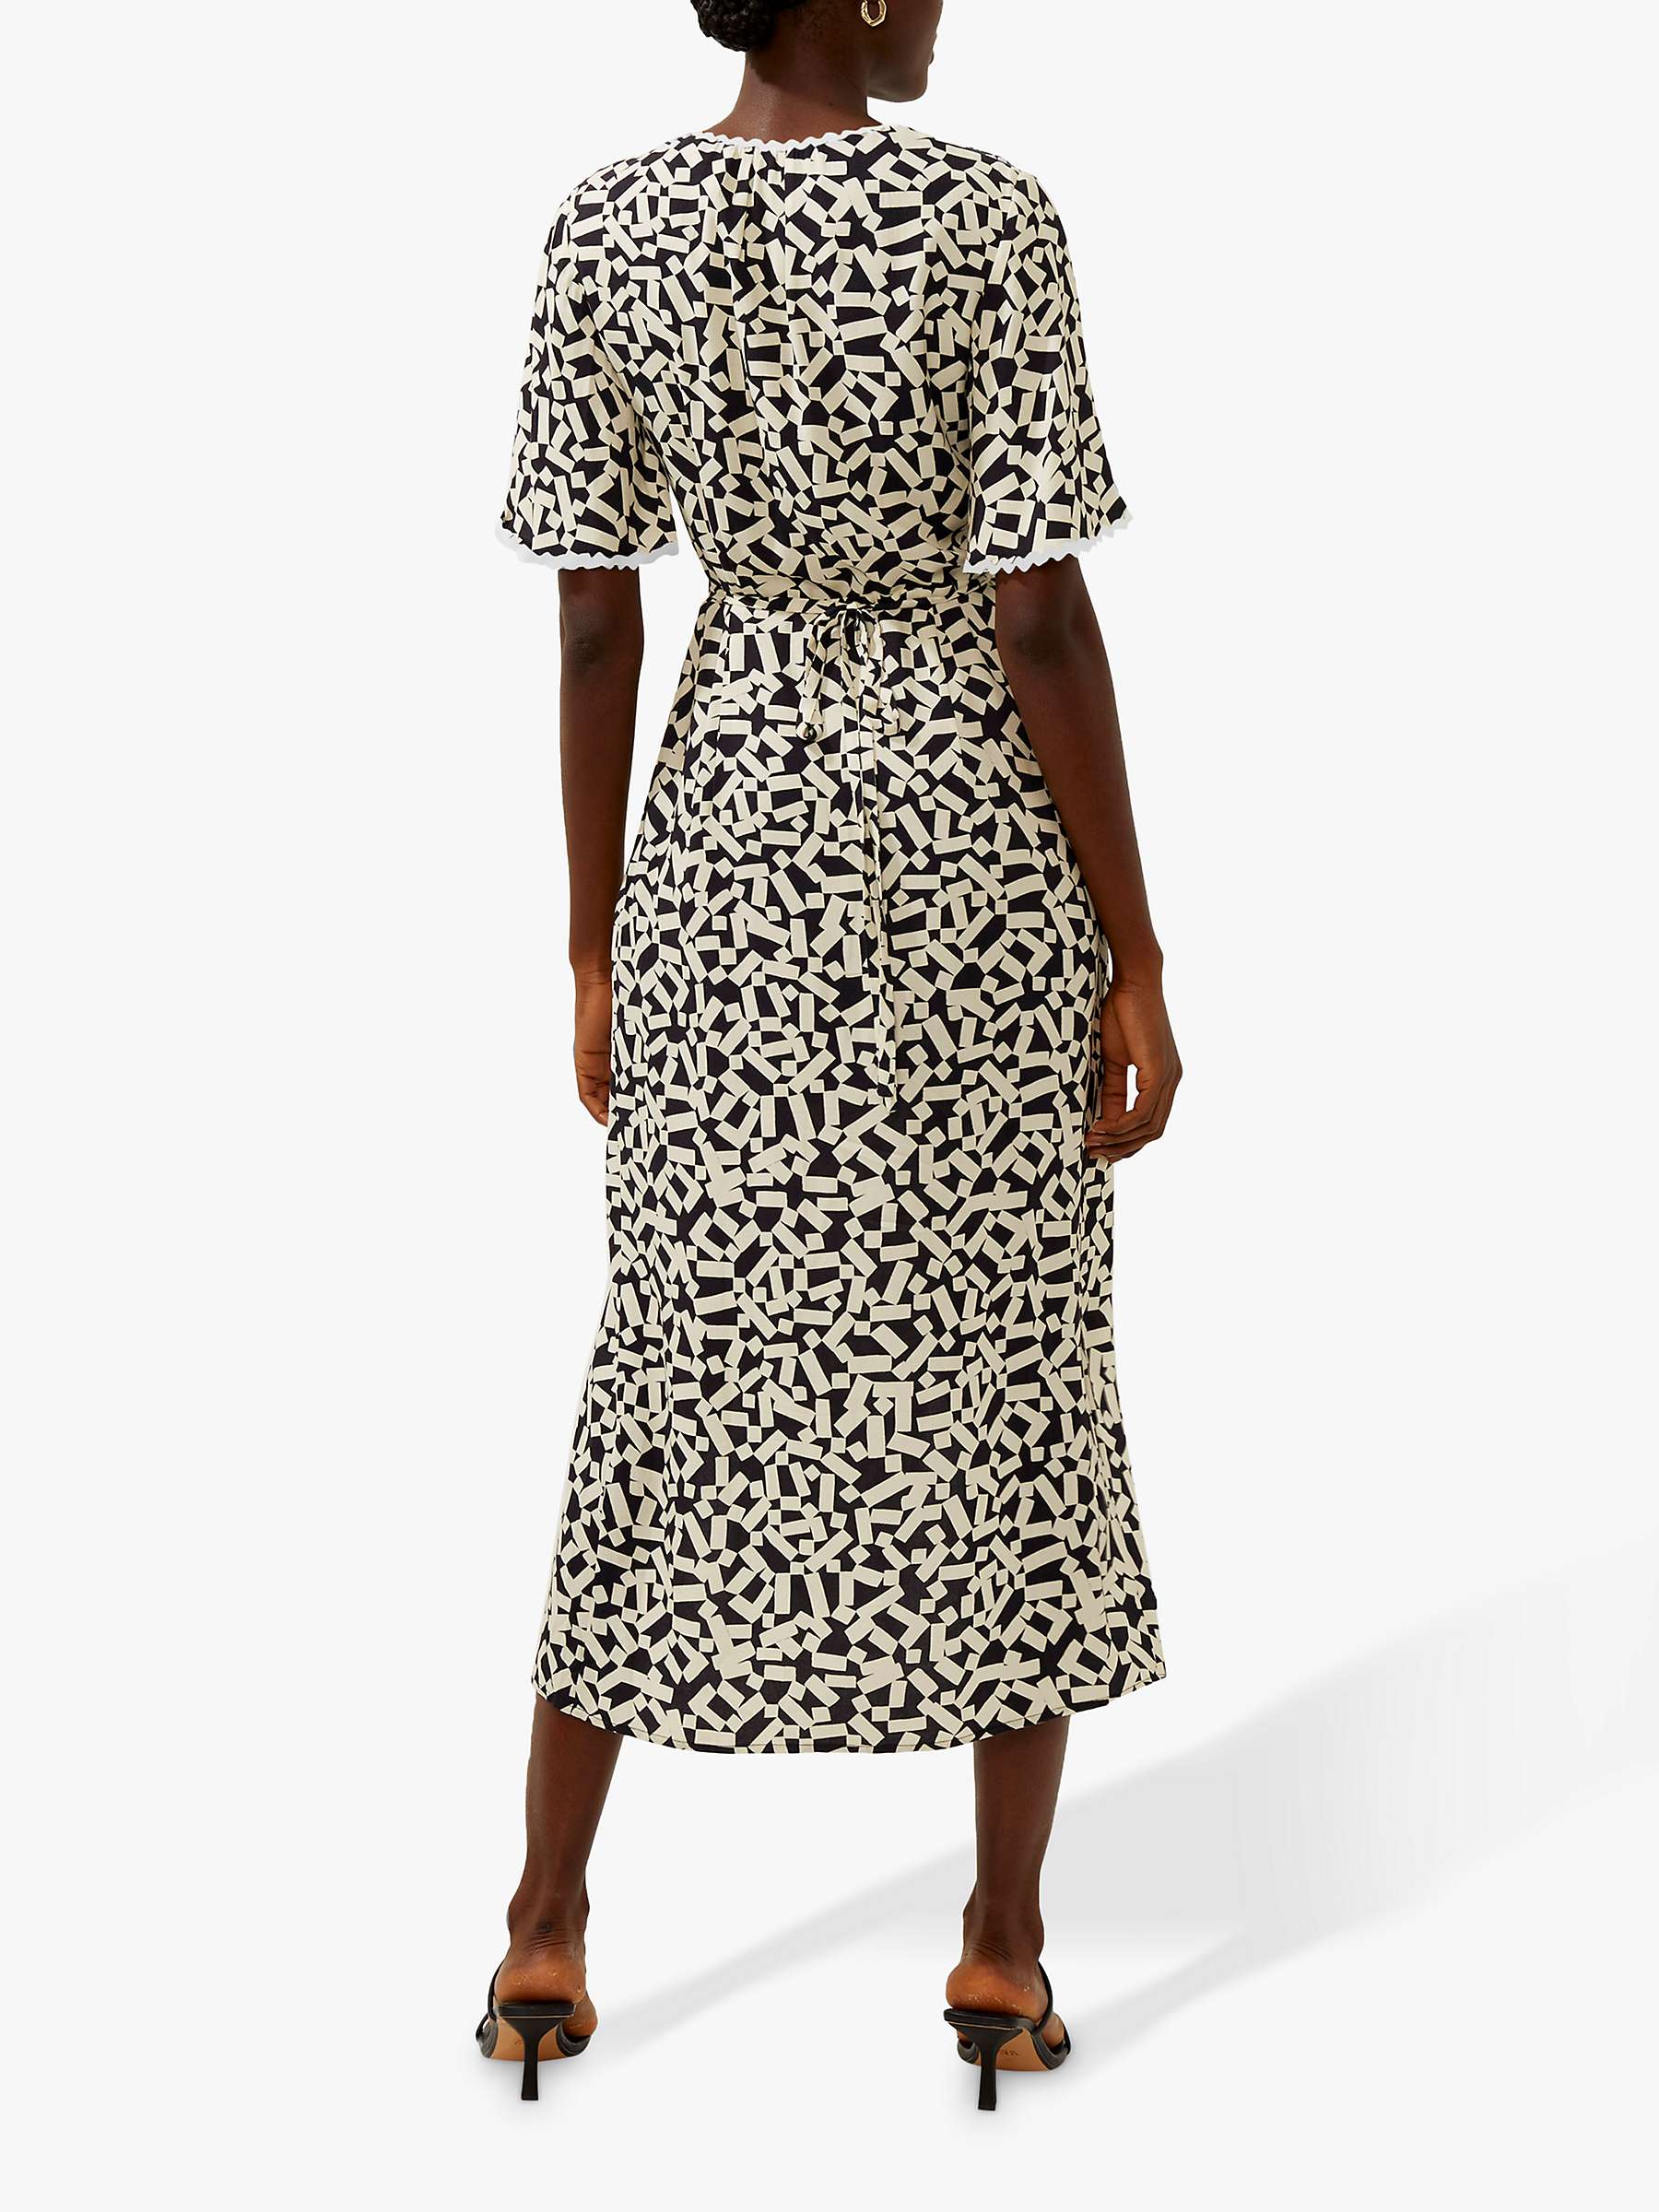 Buy French Connection Helena Rick Rack Midi Dress, Utility Blue/Class Cream Online at johnlewis.com